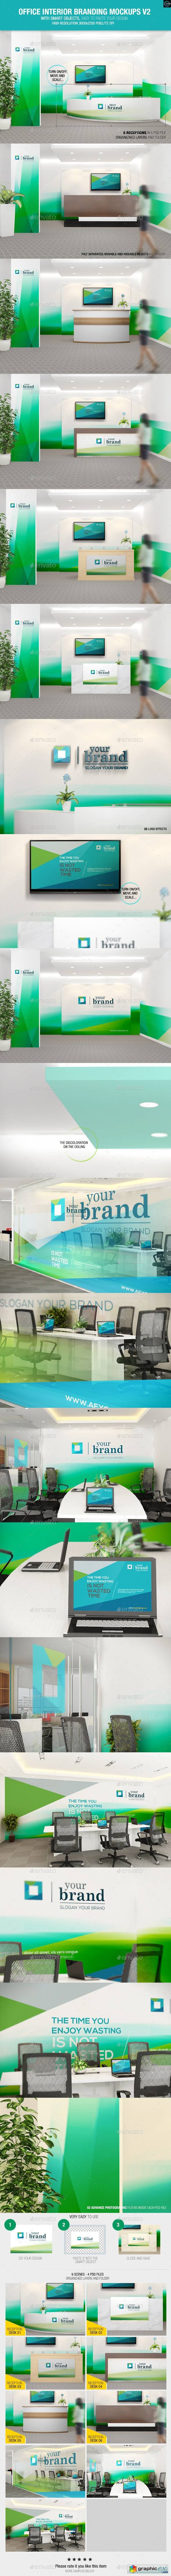 Download Office Interior Branding Mockups V2 Free Download Vector Stock Image Photoshop Icon PSD Mockup Templates